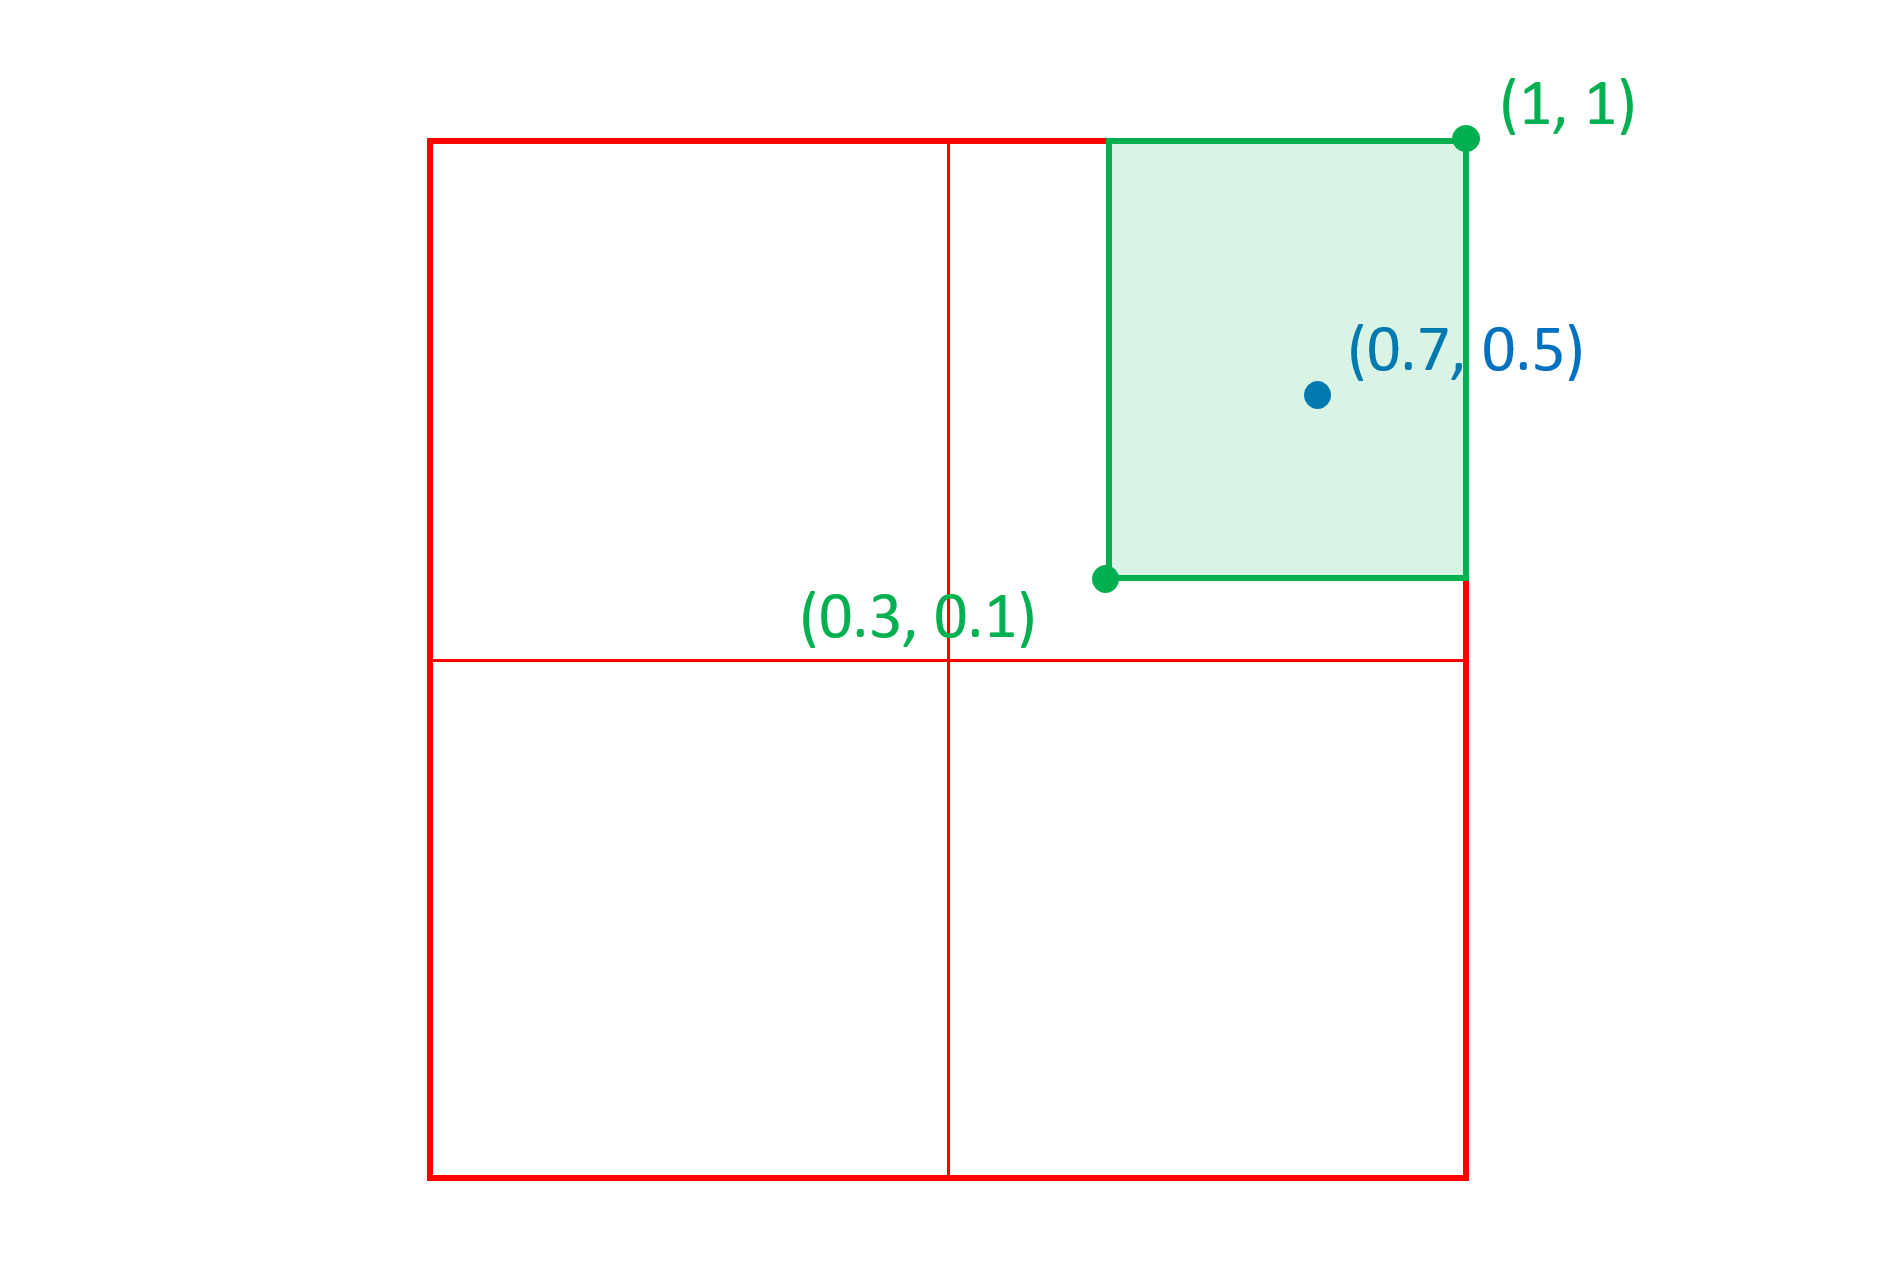 A Cartesian space with a rectangular region from (0.3, 0.1) to (1,1) with a peak point at (0.75, 0.5)